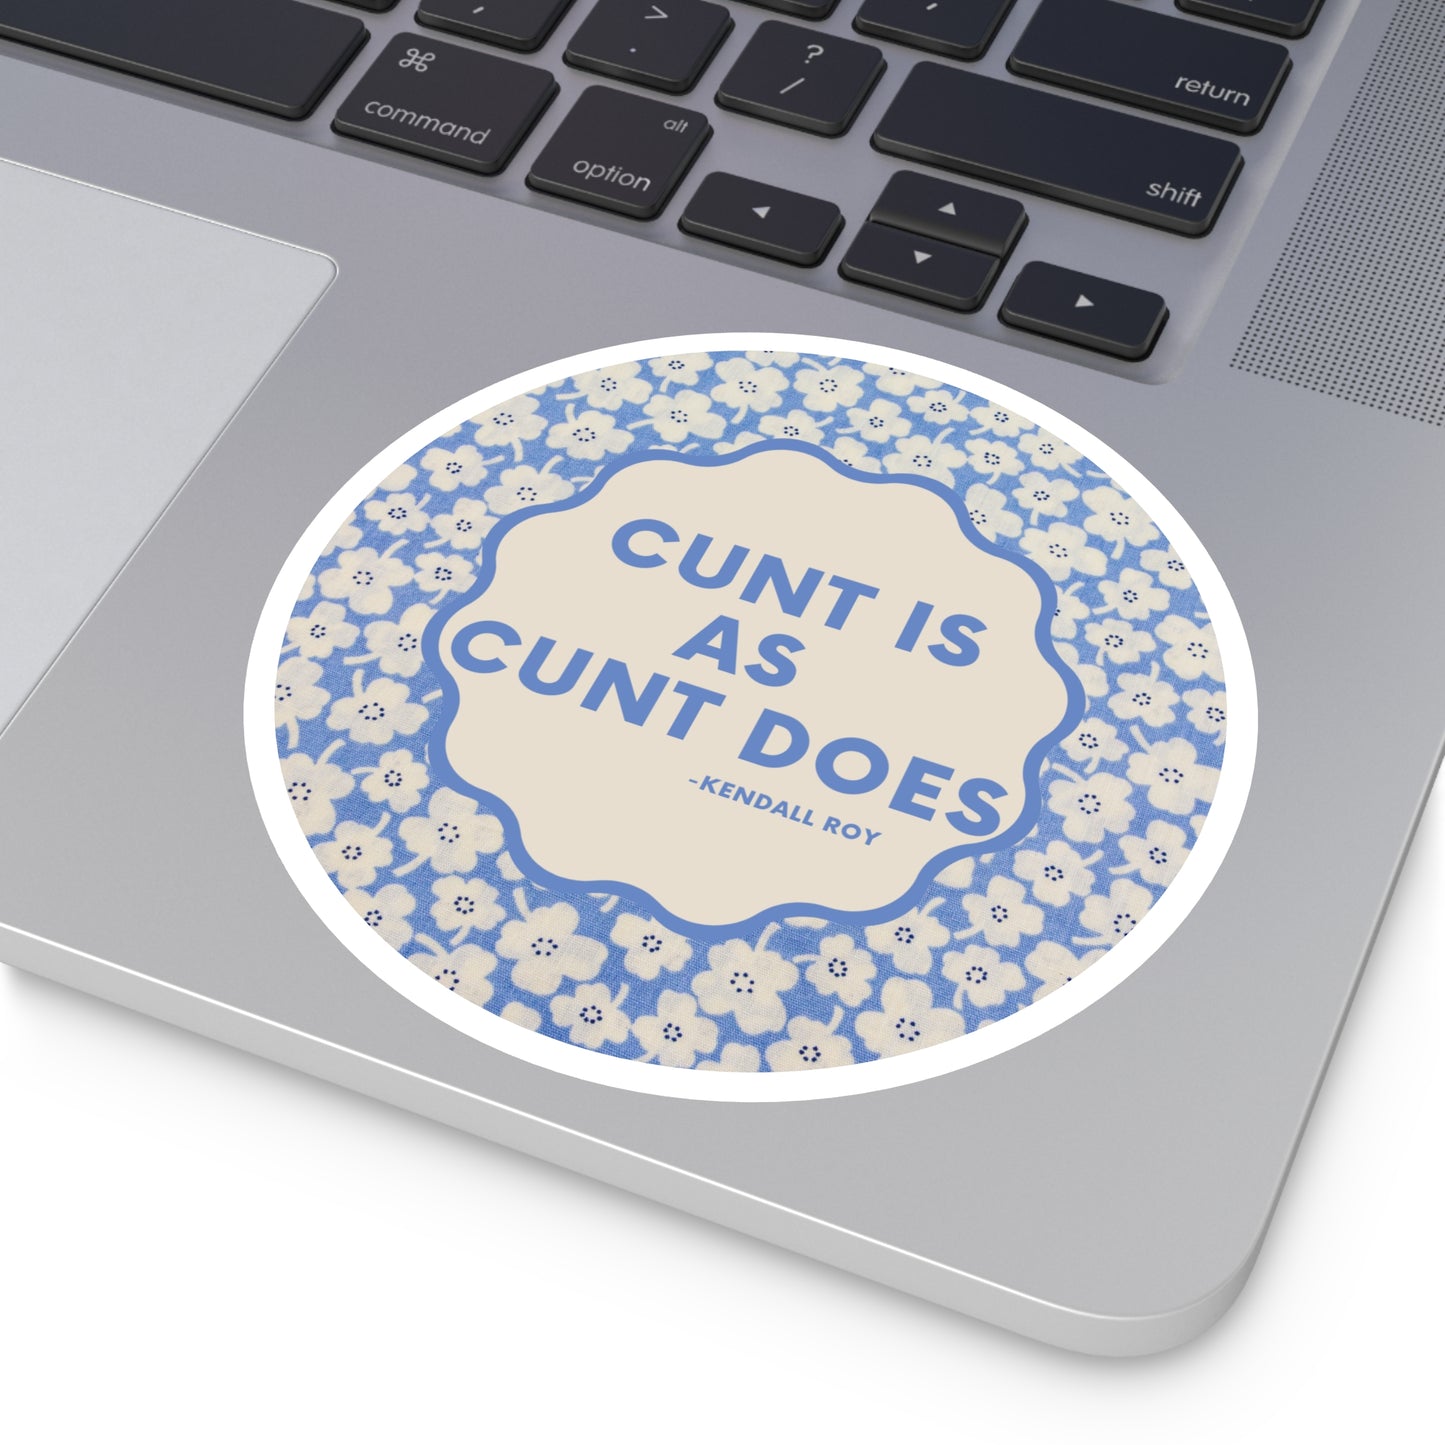 Cunt is as Cunt does -Kendall Roy, Succession Stan Sticker ; Round Stickers, Indoor\Outdoor